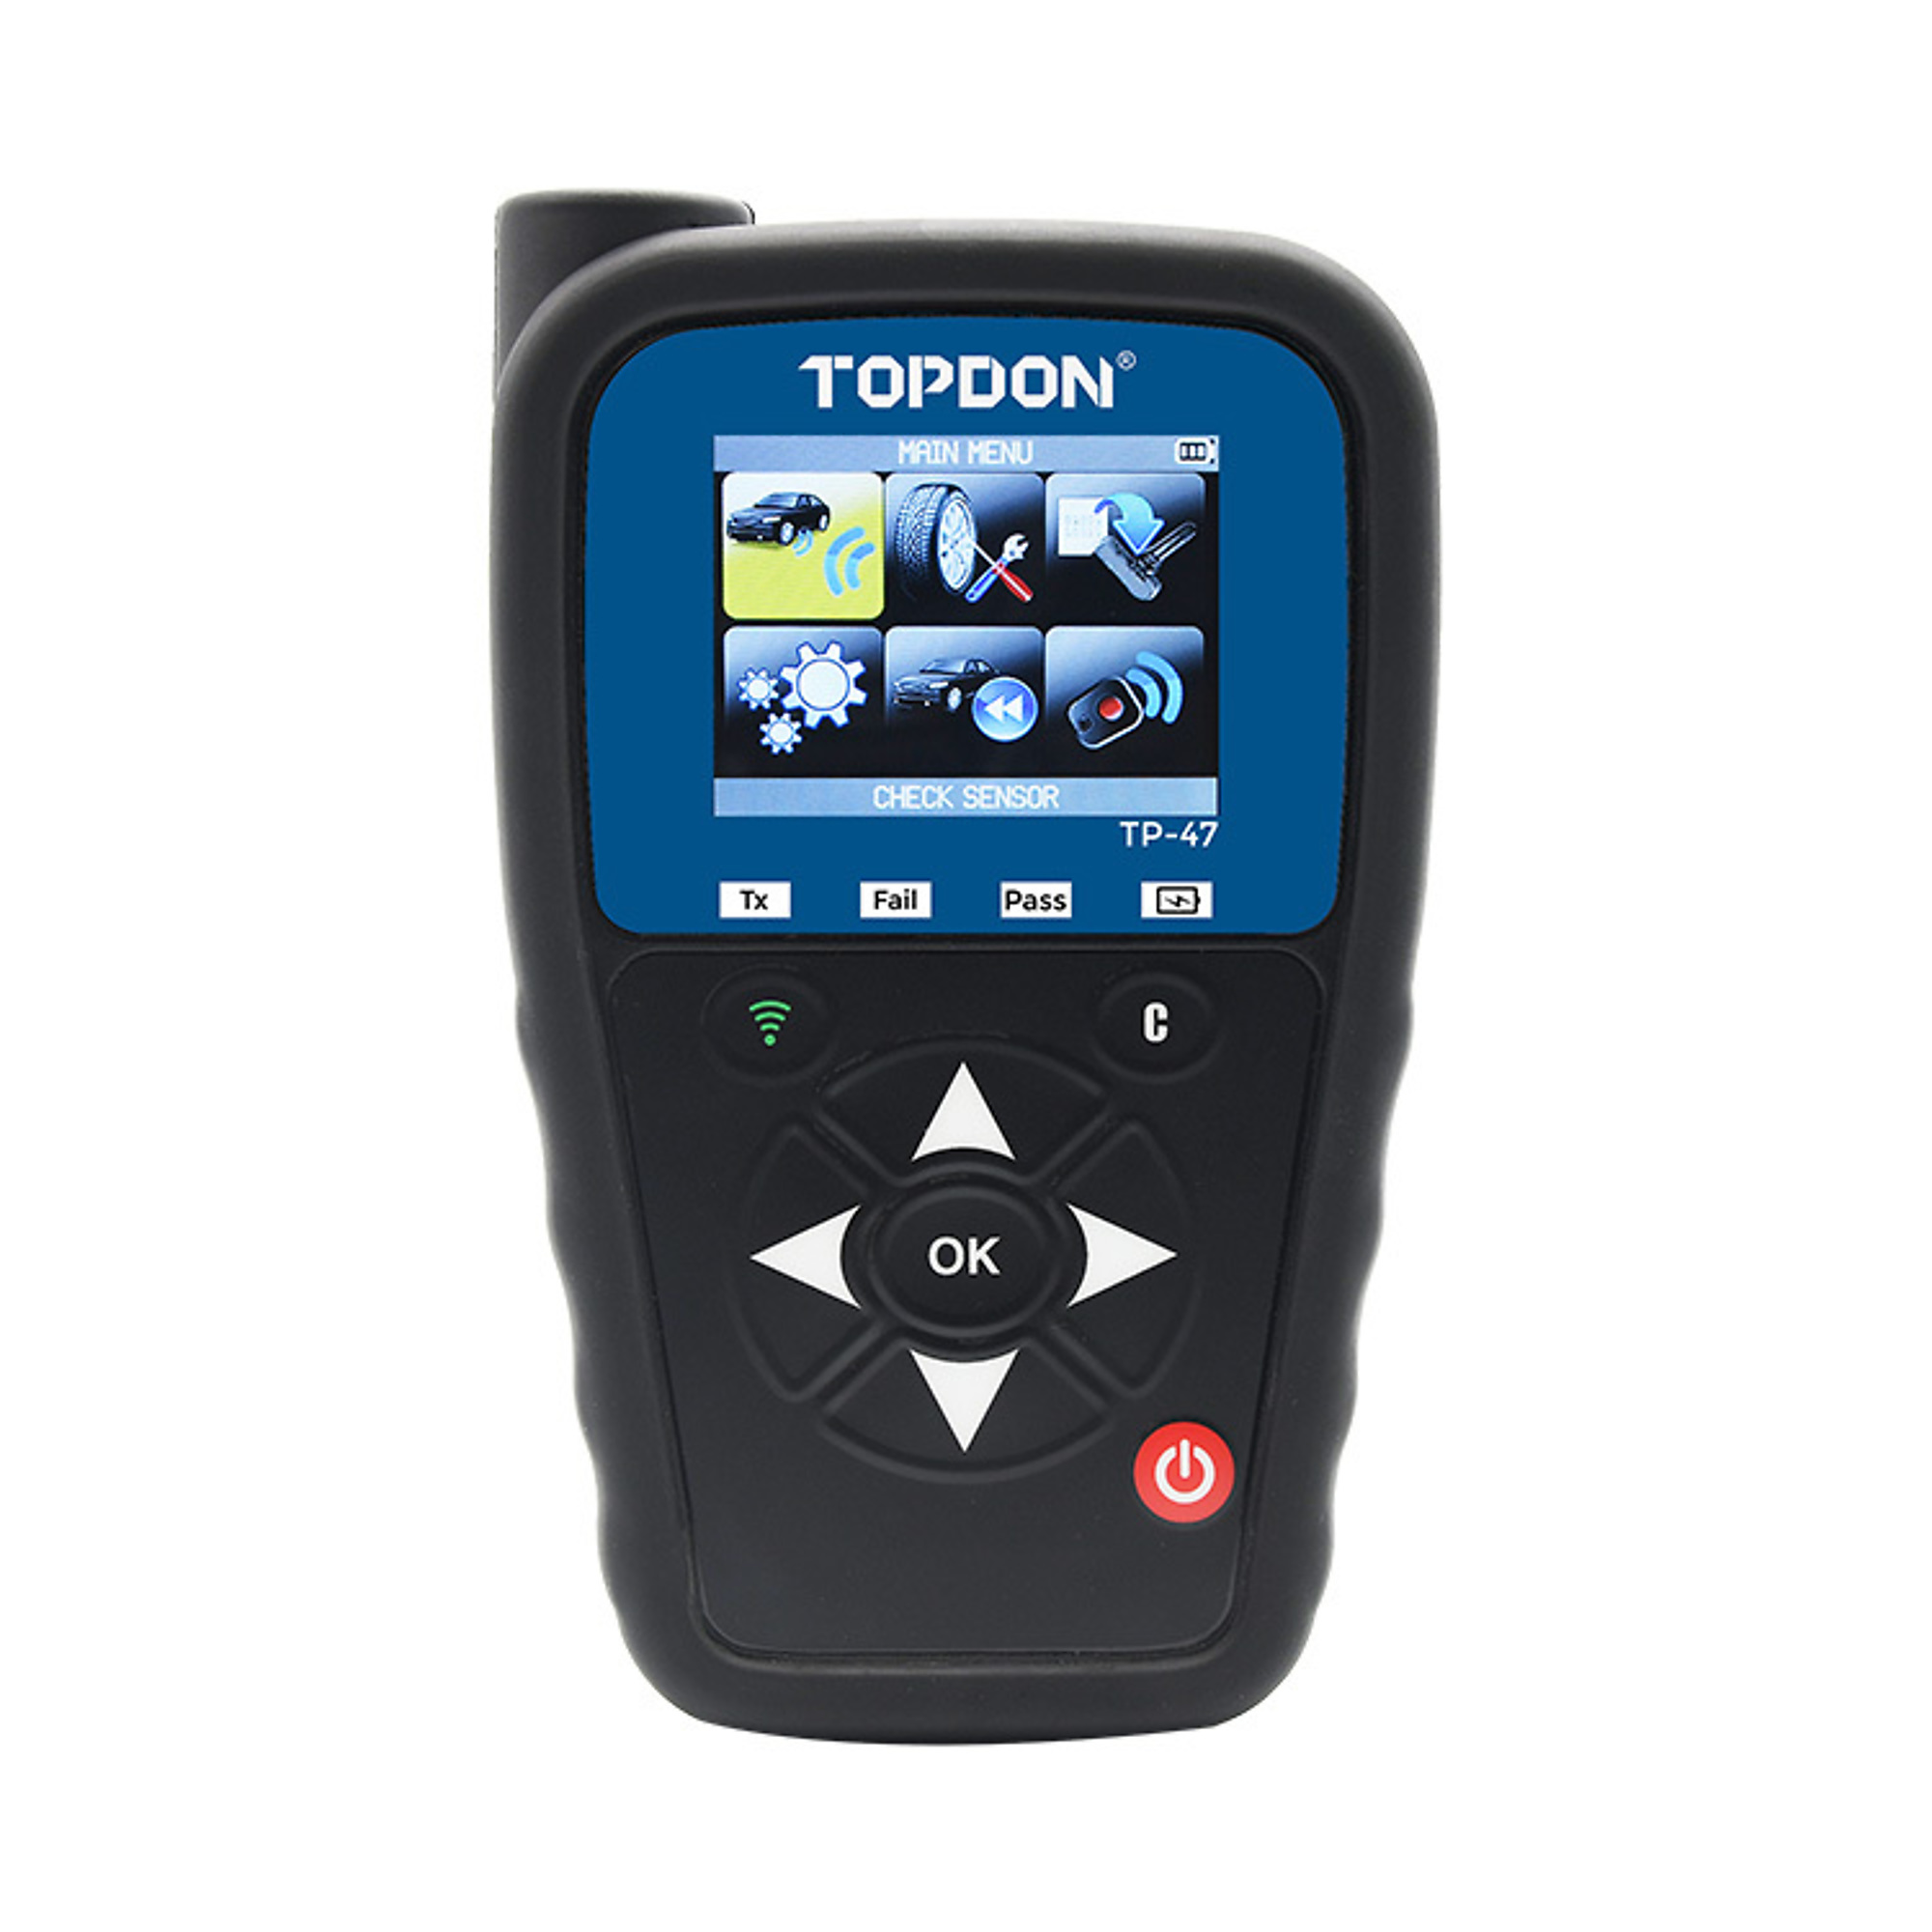 TOPDON, Comprehensive Tool for TPMS systems, Model TP47